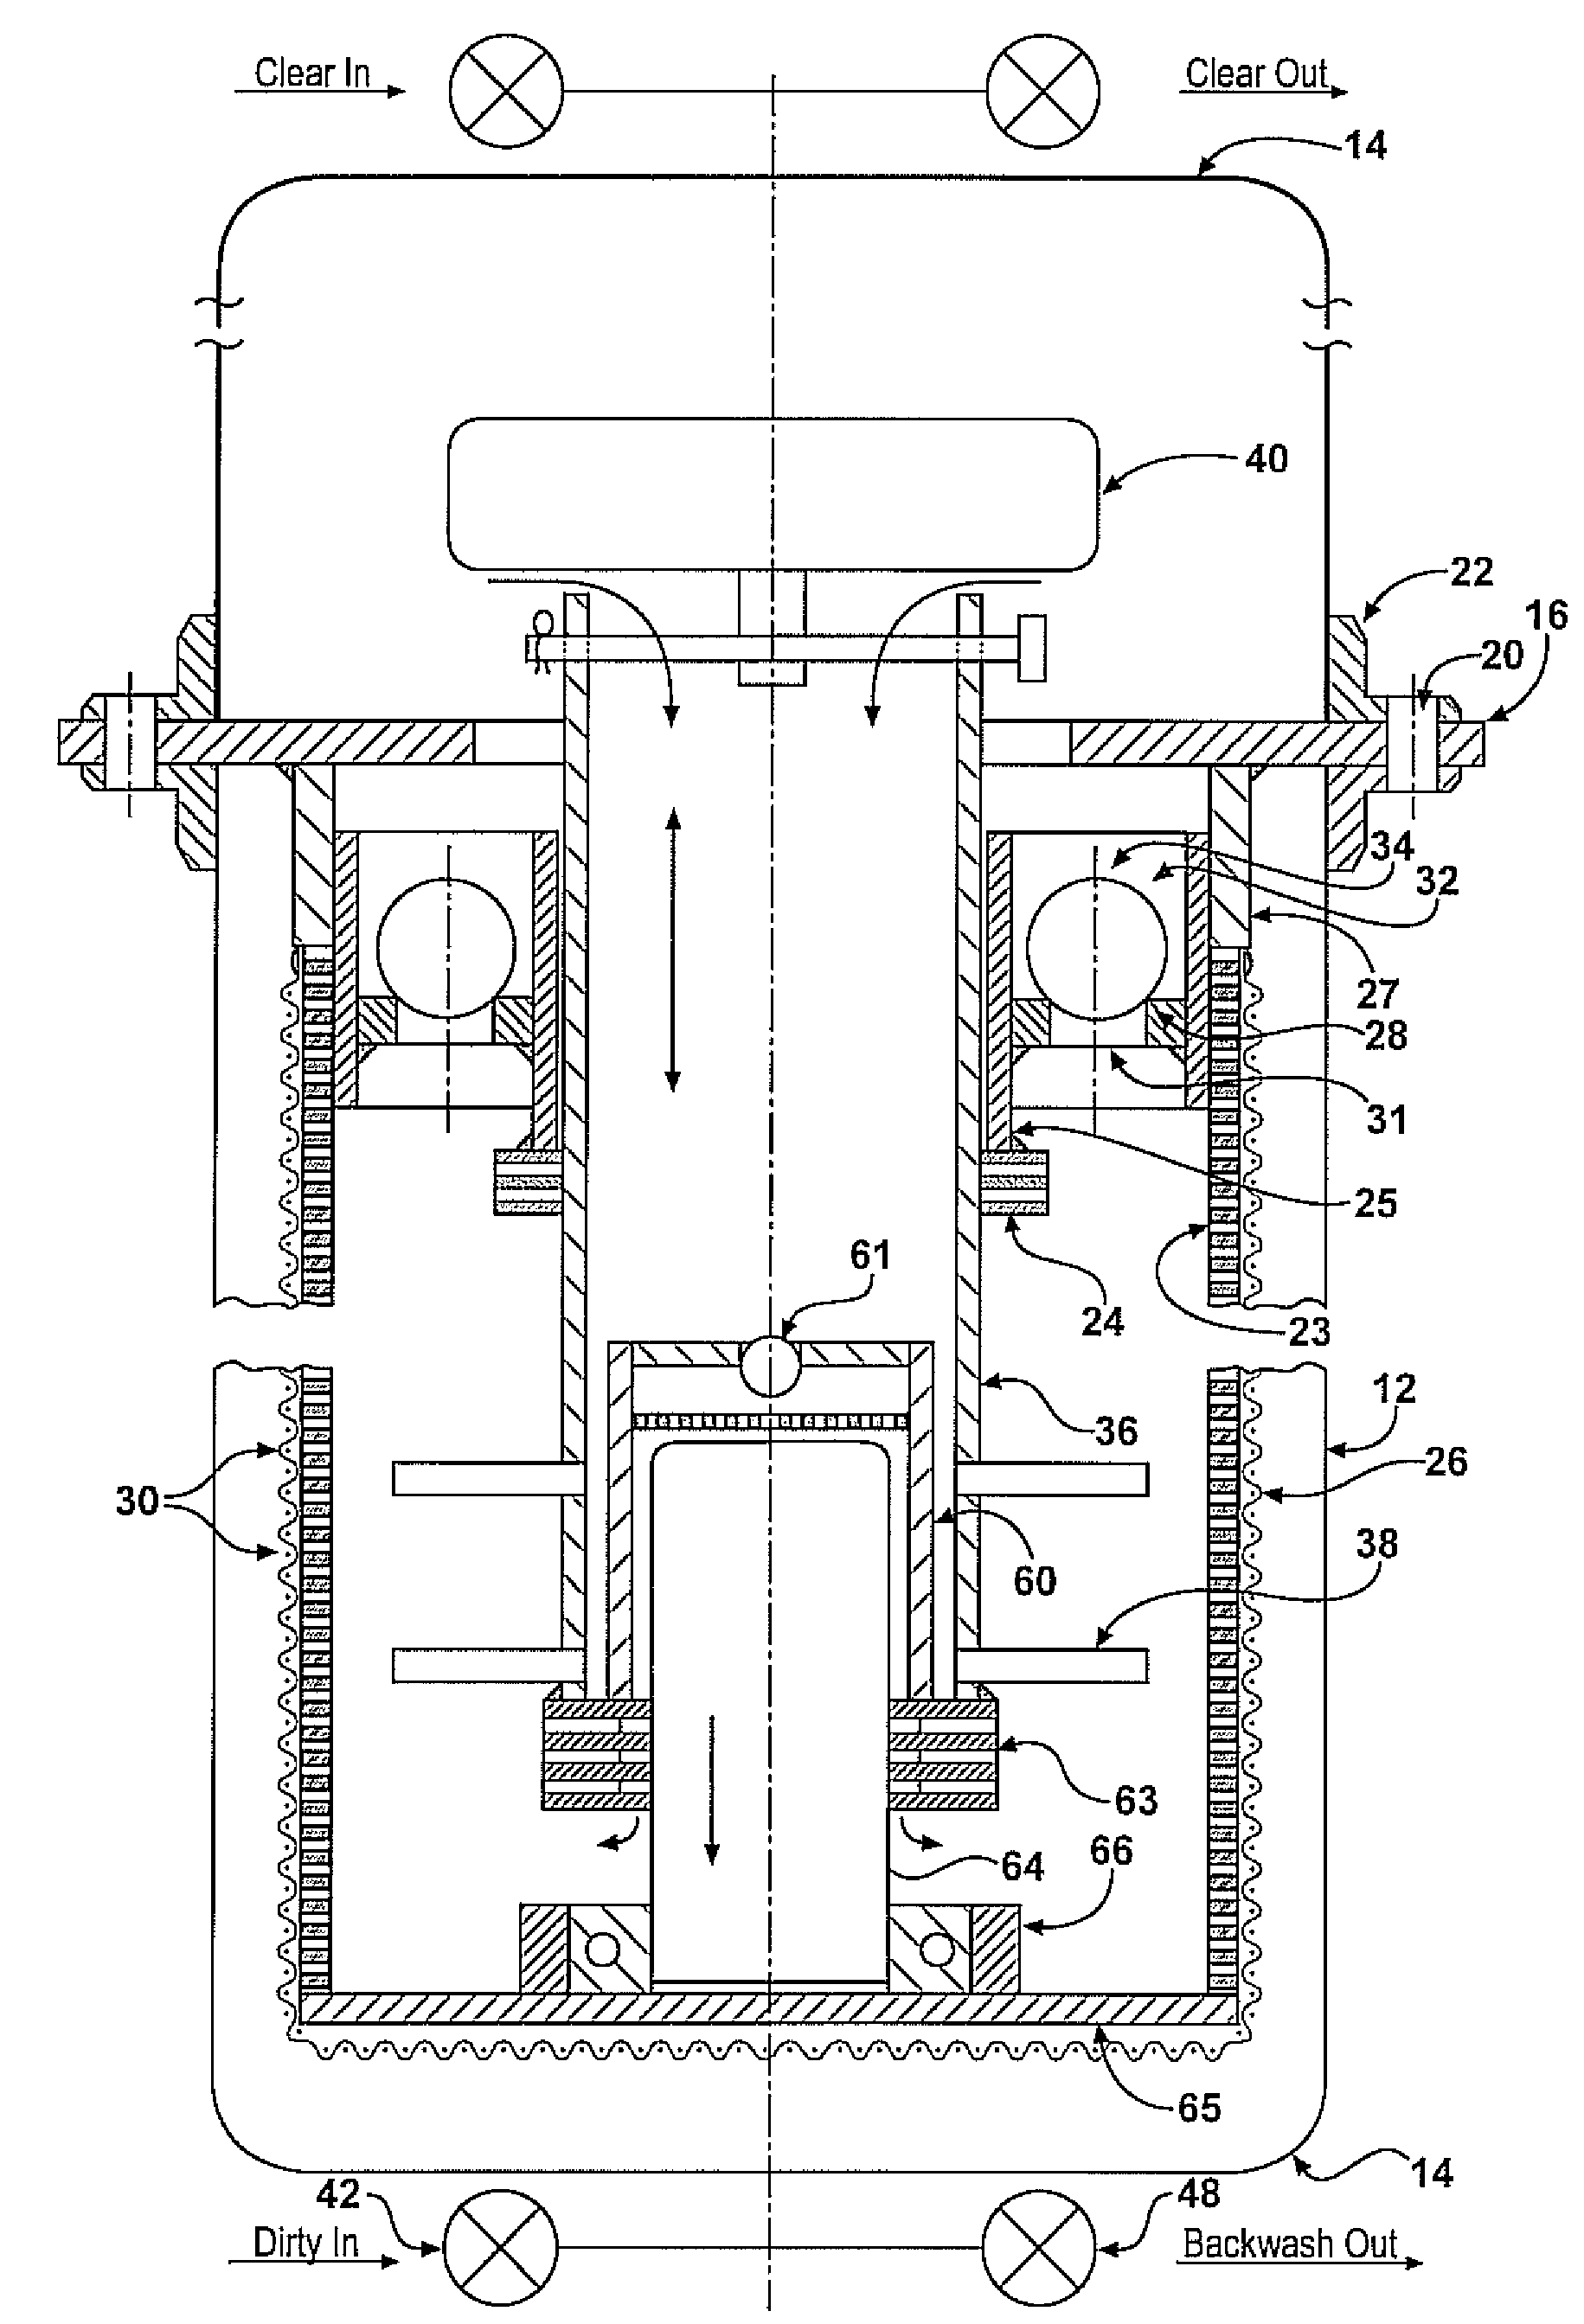 Apparatus for cleaning stationary, permanent vertical cylindrical cartridges incorporating a float affixed to a central and linearly traversable backwash tube incorporating spray nozzles to induce rotation